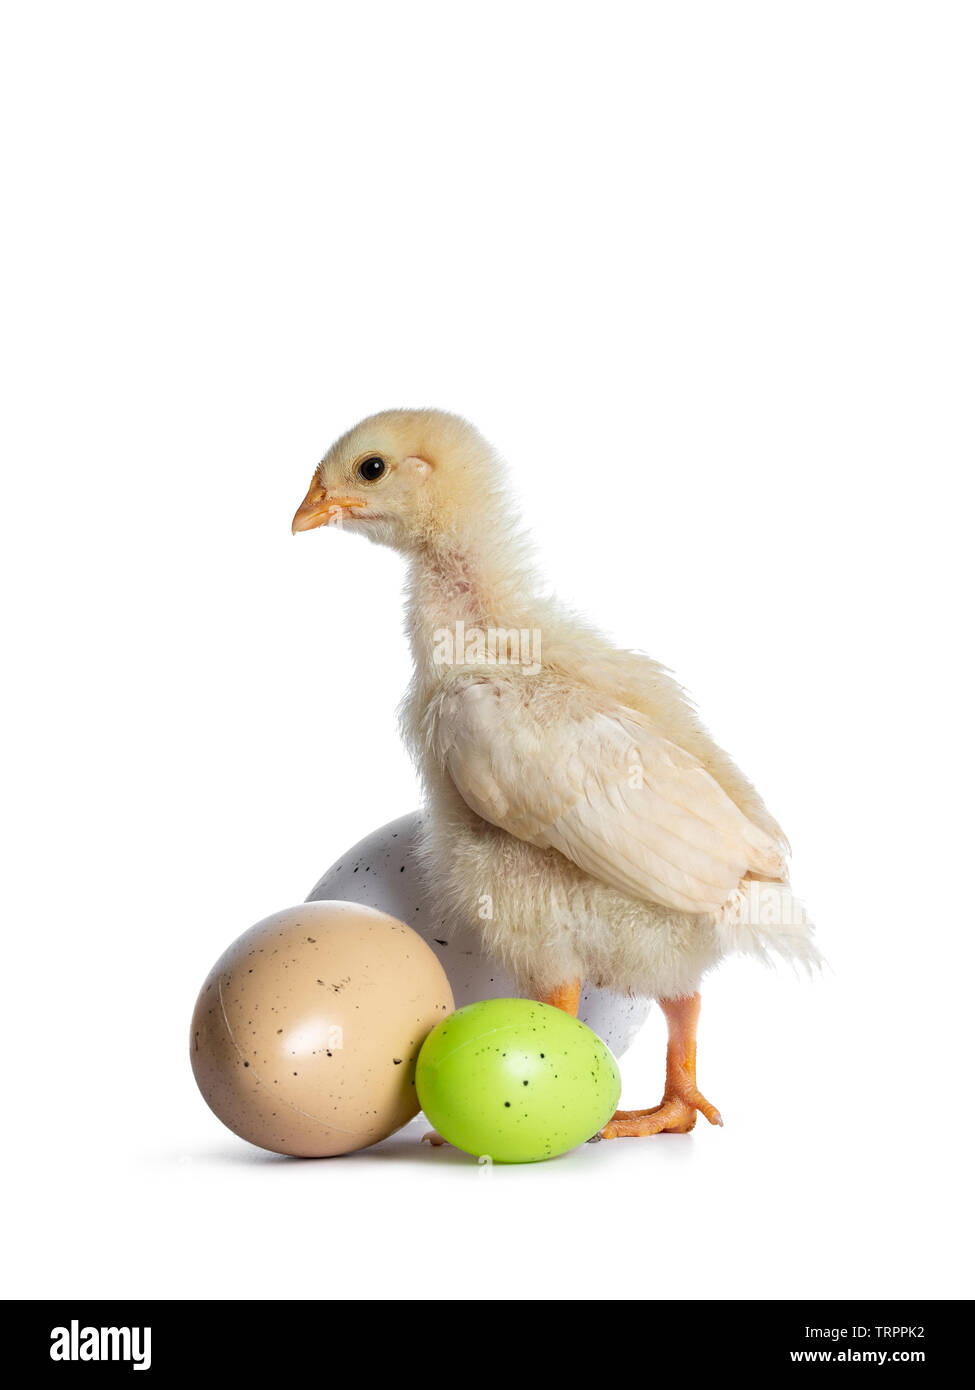 Cute baby chick standing die ways with 3 colored easter eggs. Looking straight ahead to the side. Isolated on a white backgroud. Stock Photo